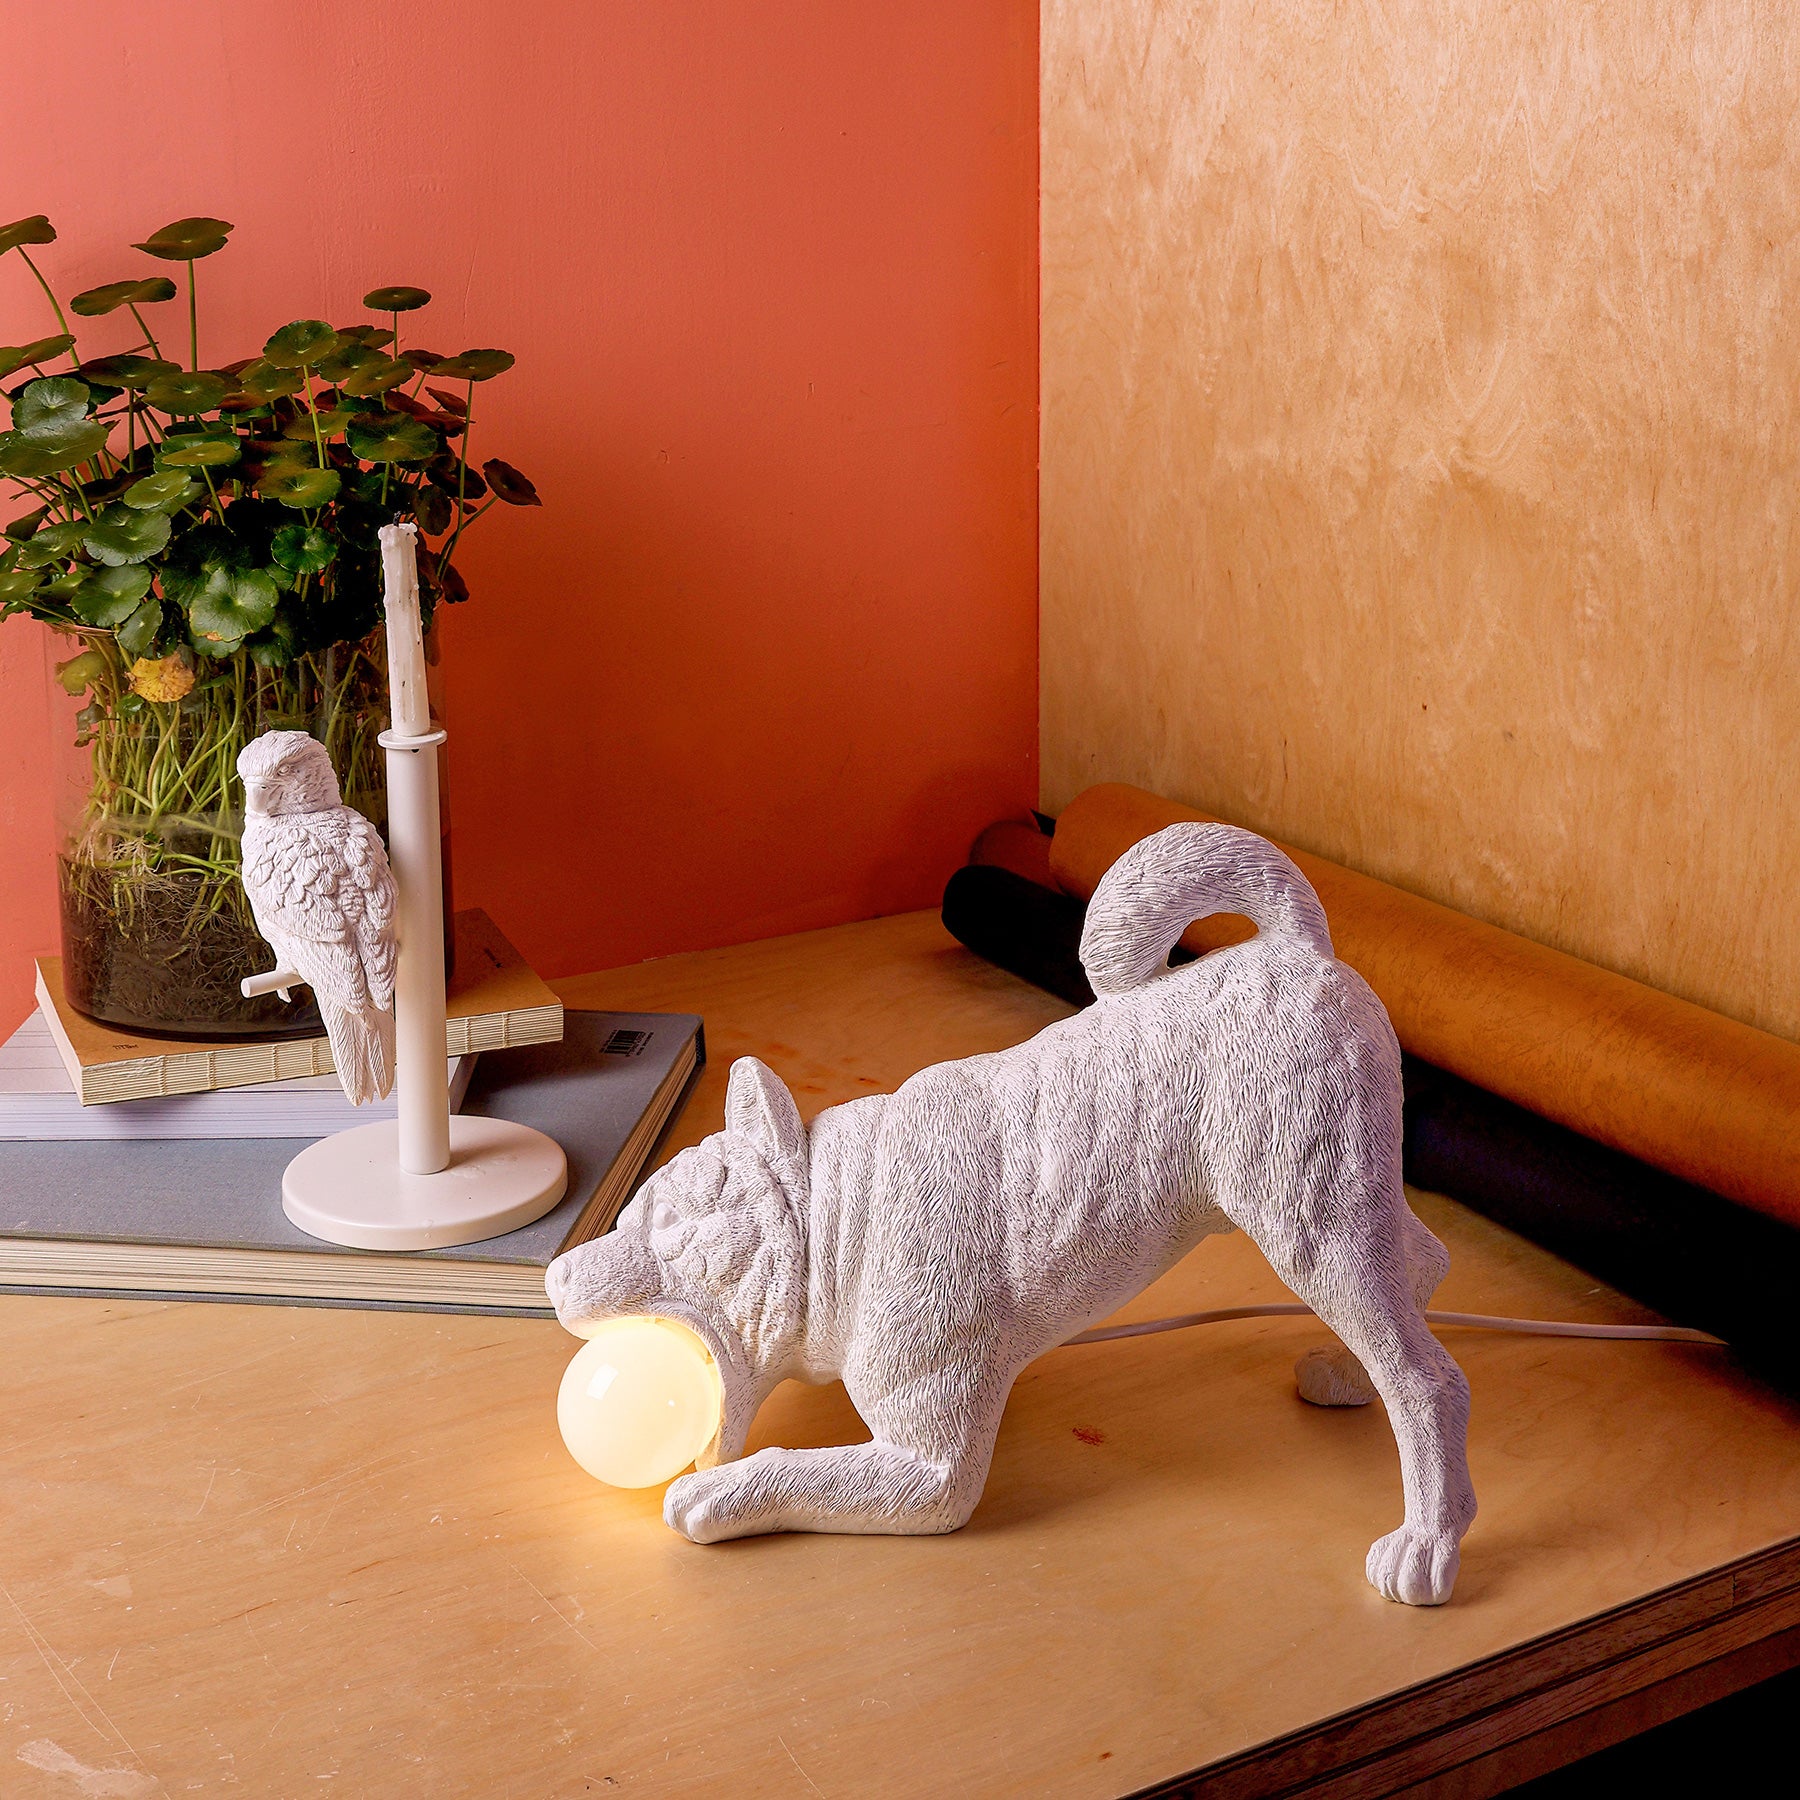 Dog lamp and it's statue: I need some play and you need some light!